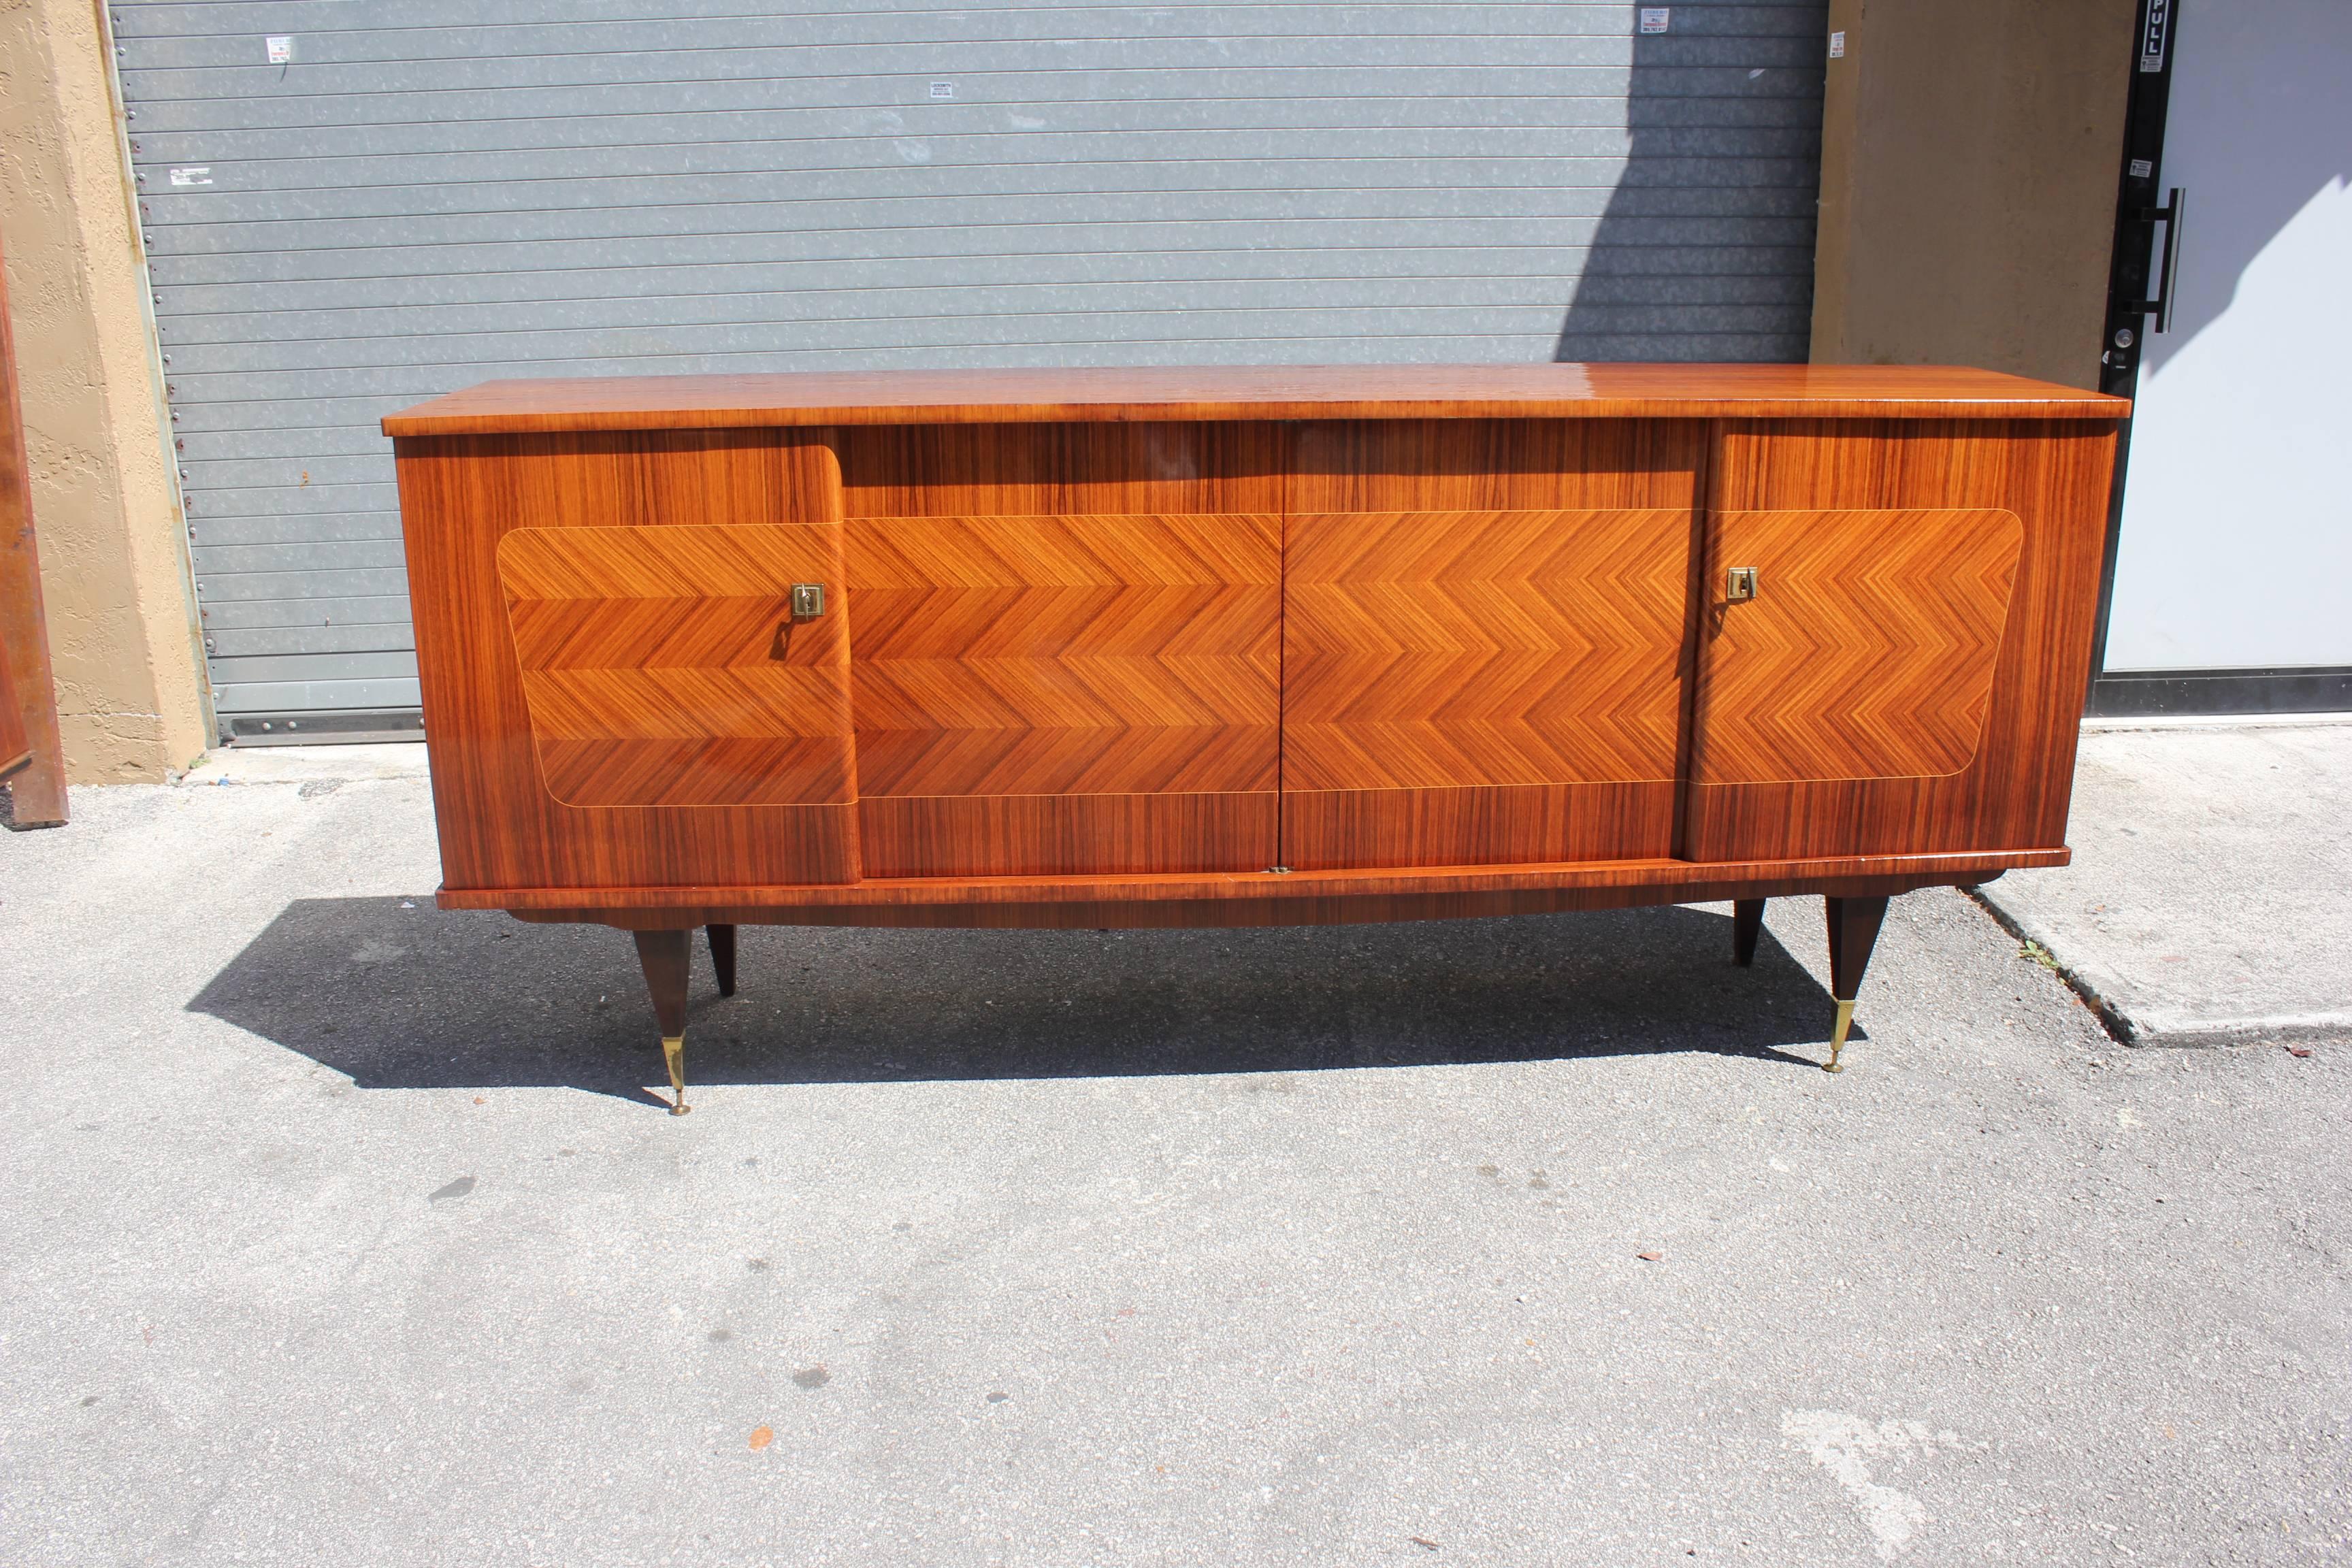 French Art Deco light exotic Macassar ebony''ZIG ZAG''sideboard or buffet in perfect condition, circa 1940s . With two drawers inside and all four shelves adjustable , and you can remove the shelves if you need more space ,beautiful bronze hardware